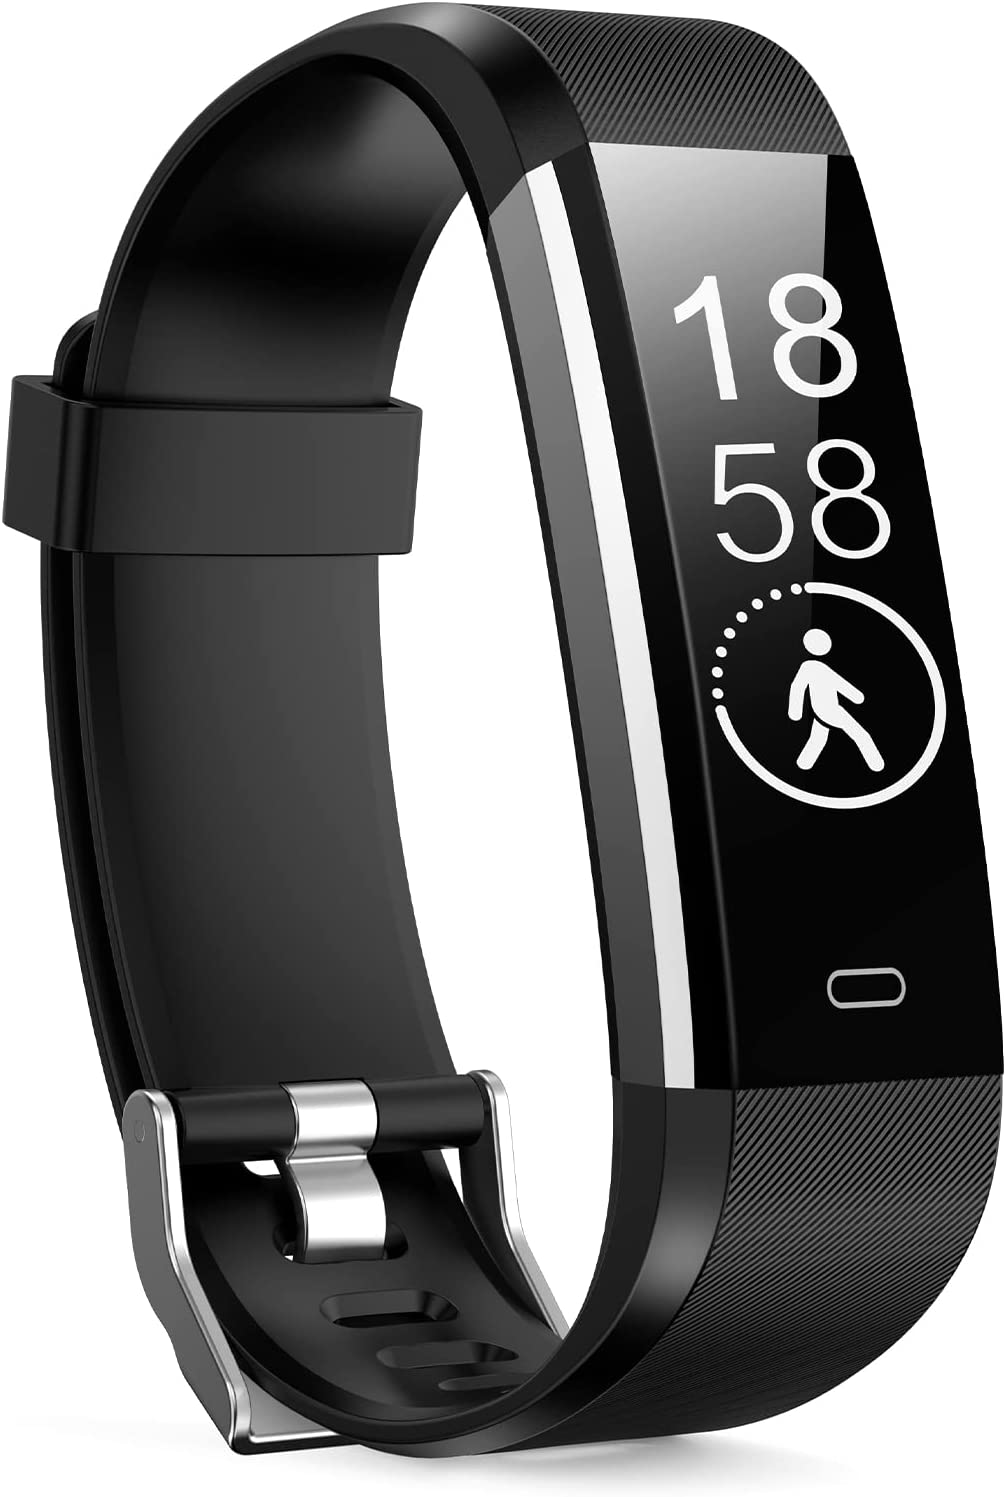 Stiive Fitness Tracker With Heart Rate